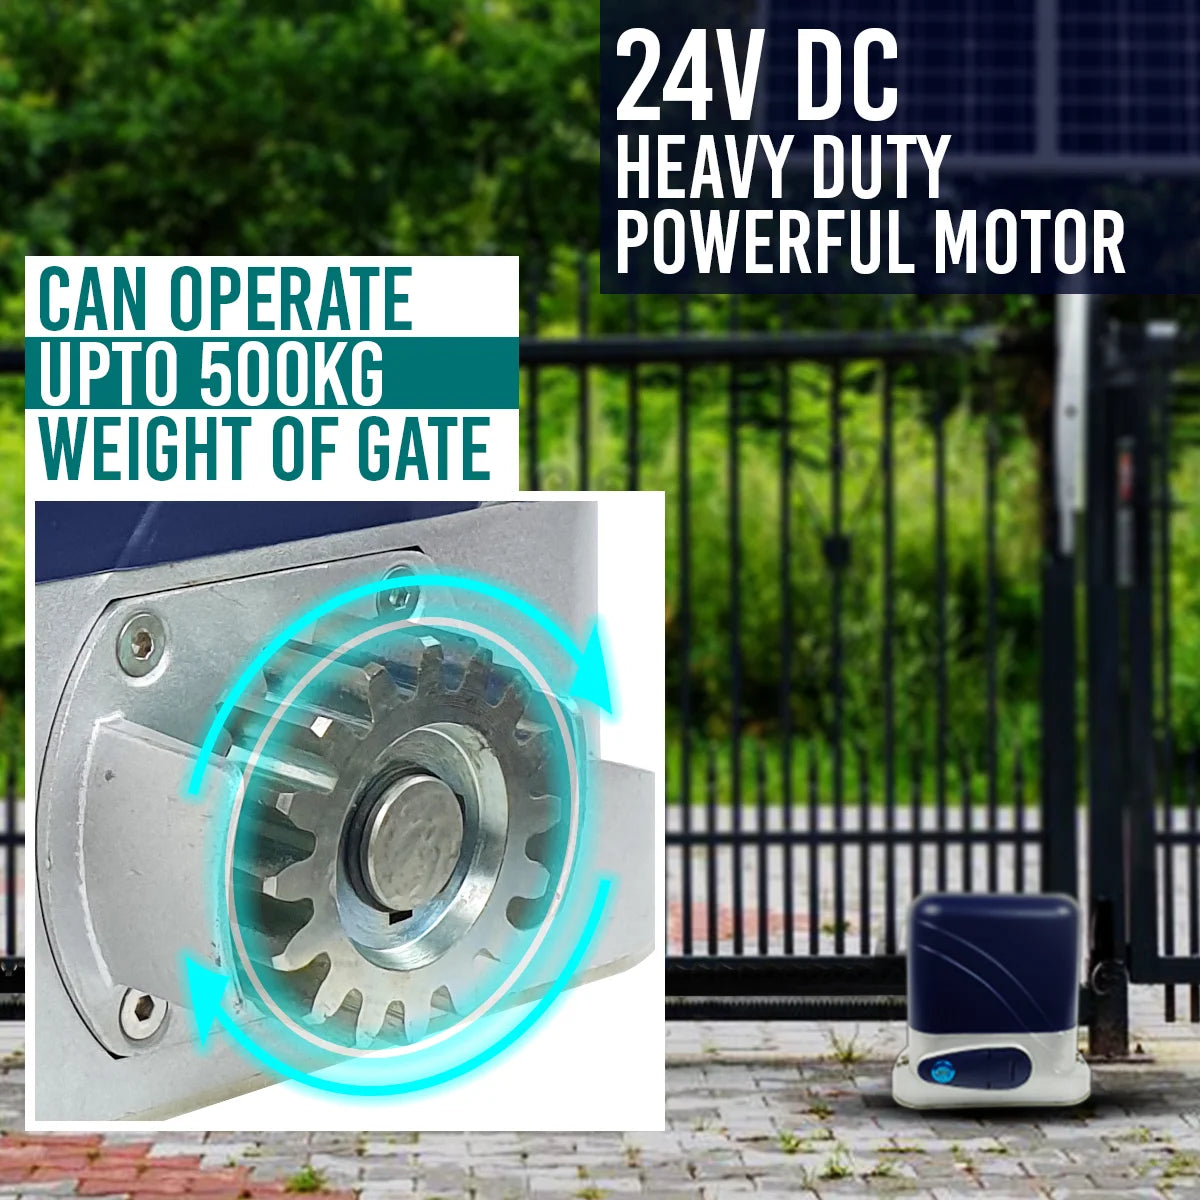 Full Solar Power Automatic Sliding Gate Opener Motor with WiFi Phone APP control